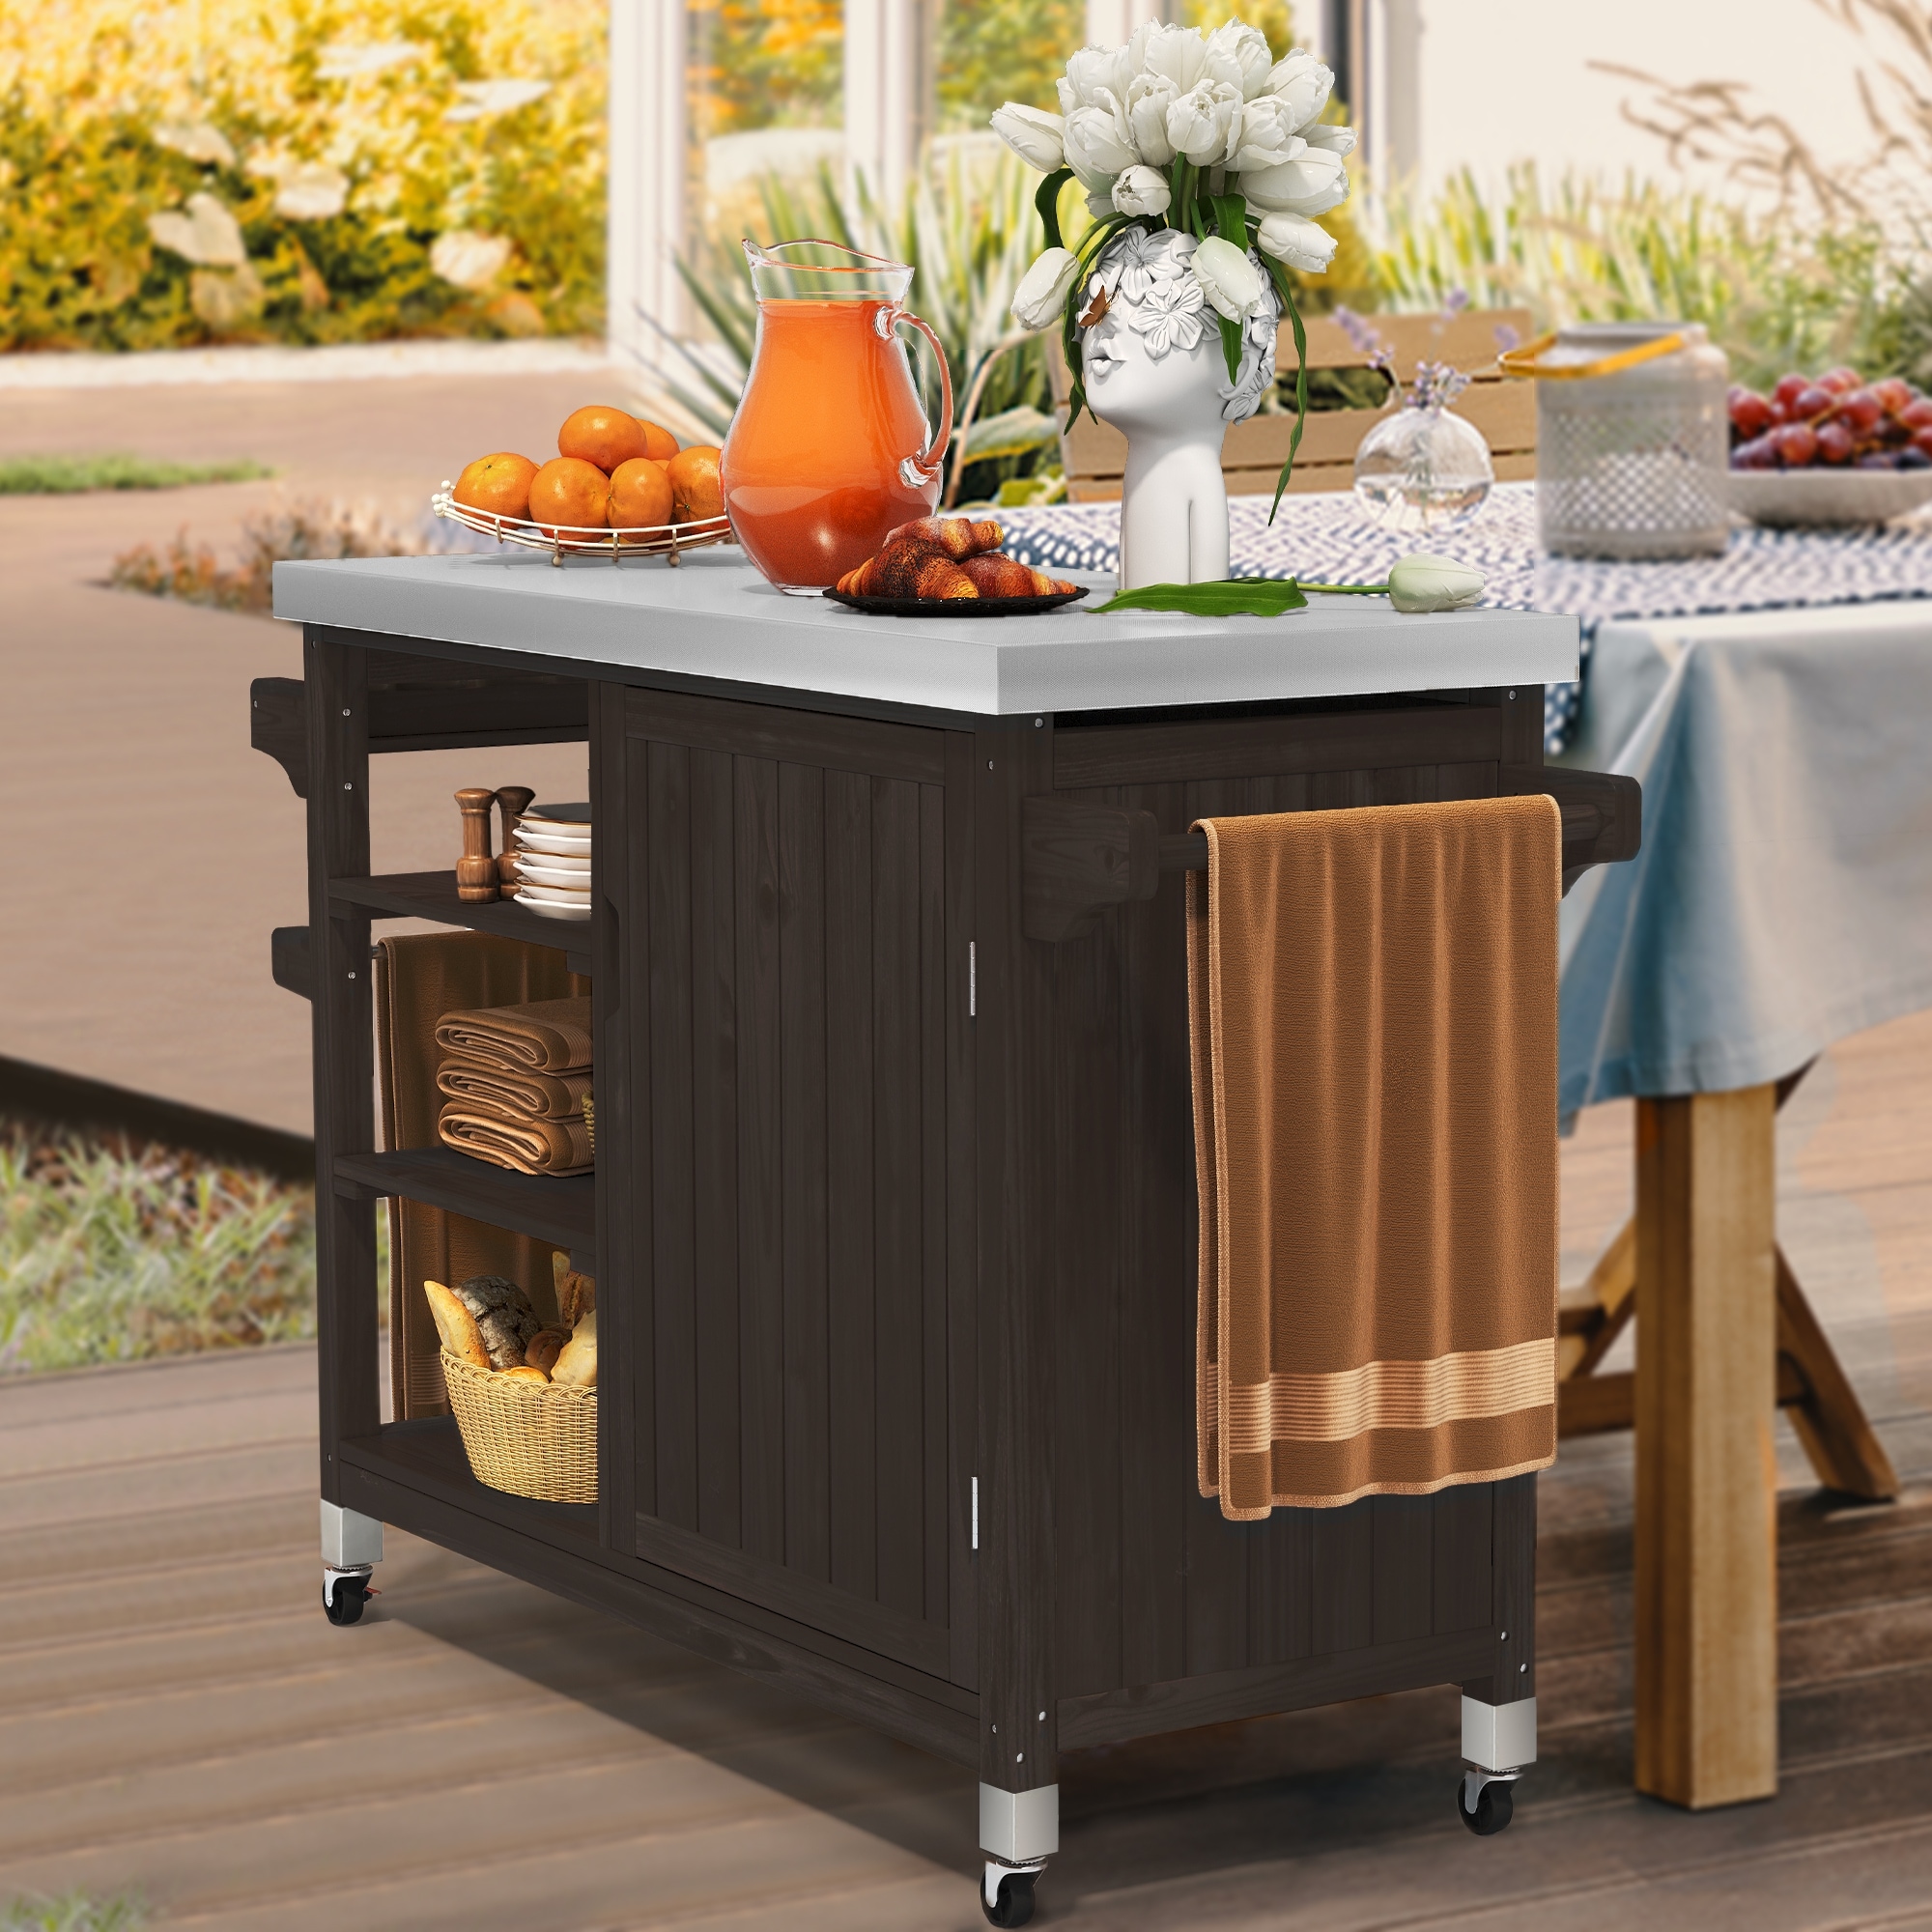 Grill table with stainless steel top